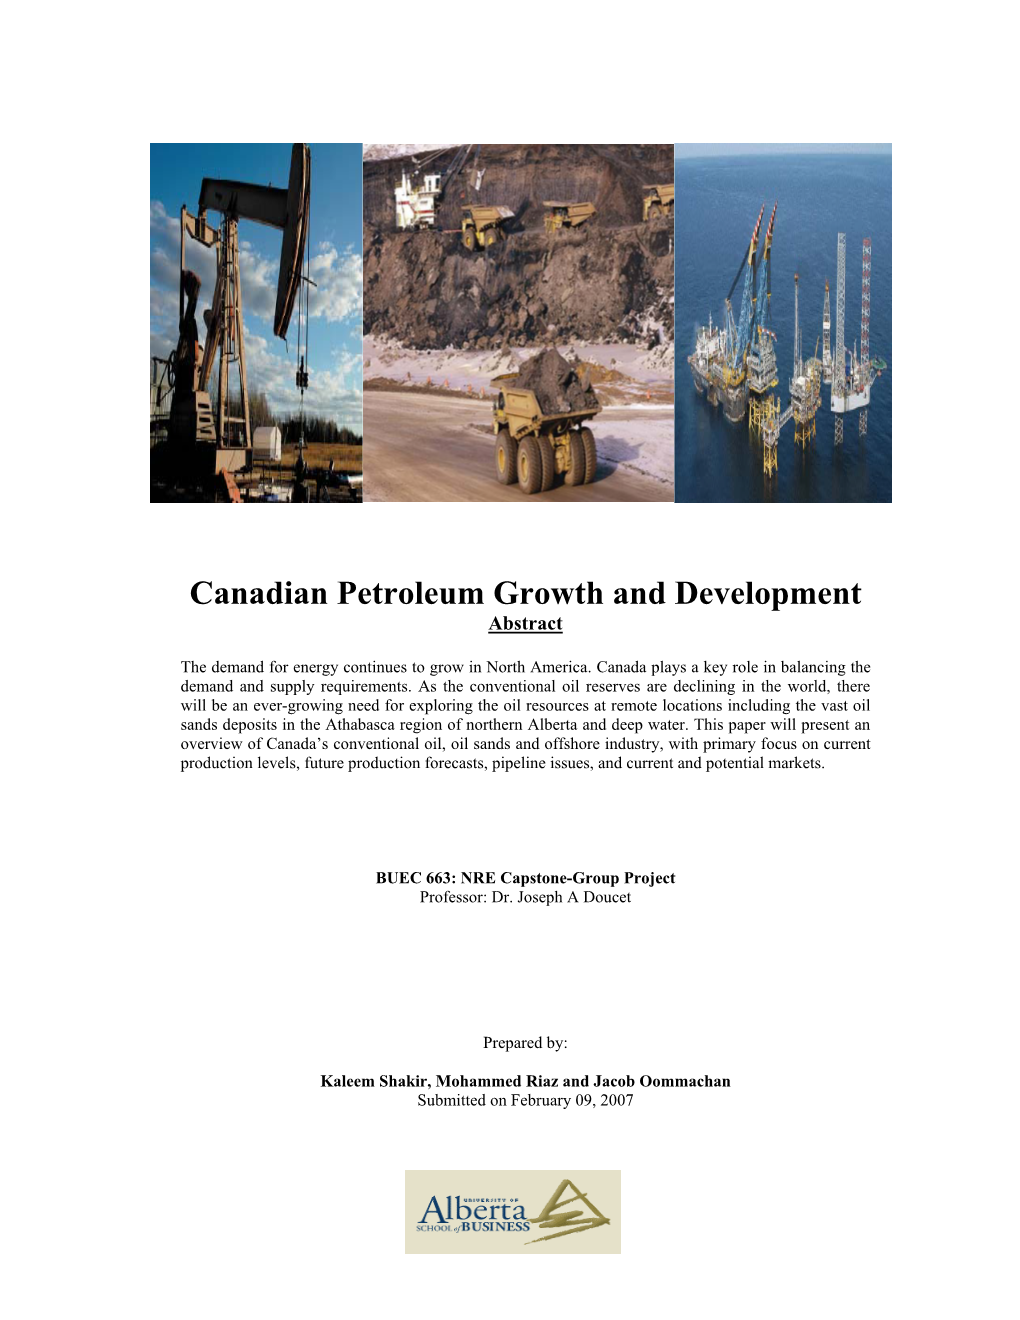 Canadian Petroleum Growth and Development Abstract